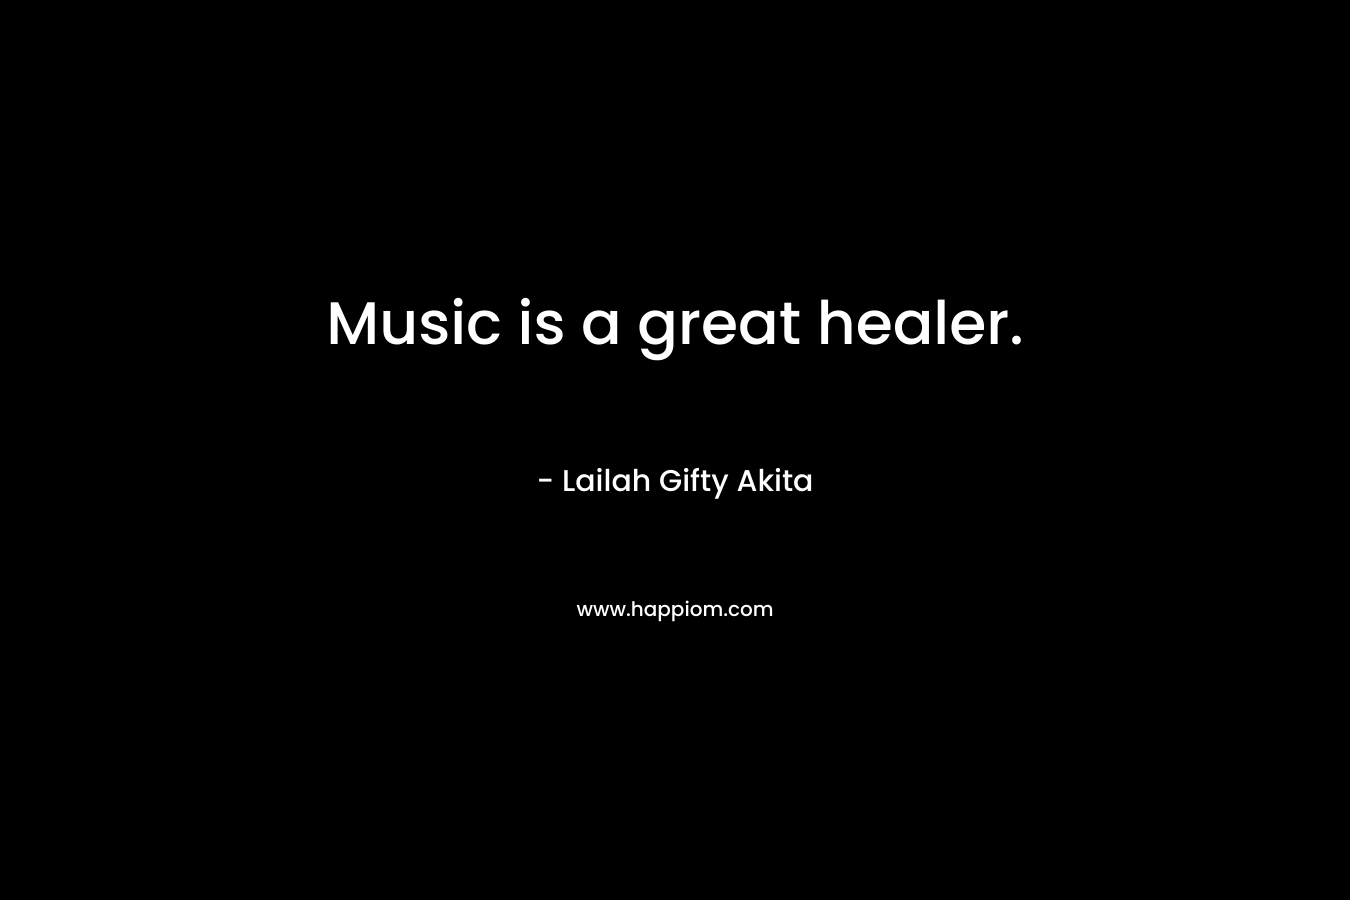 Music is a great healer. – Lailah Gifty Akita